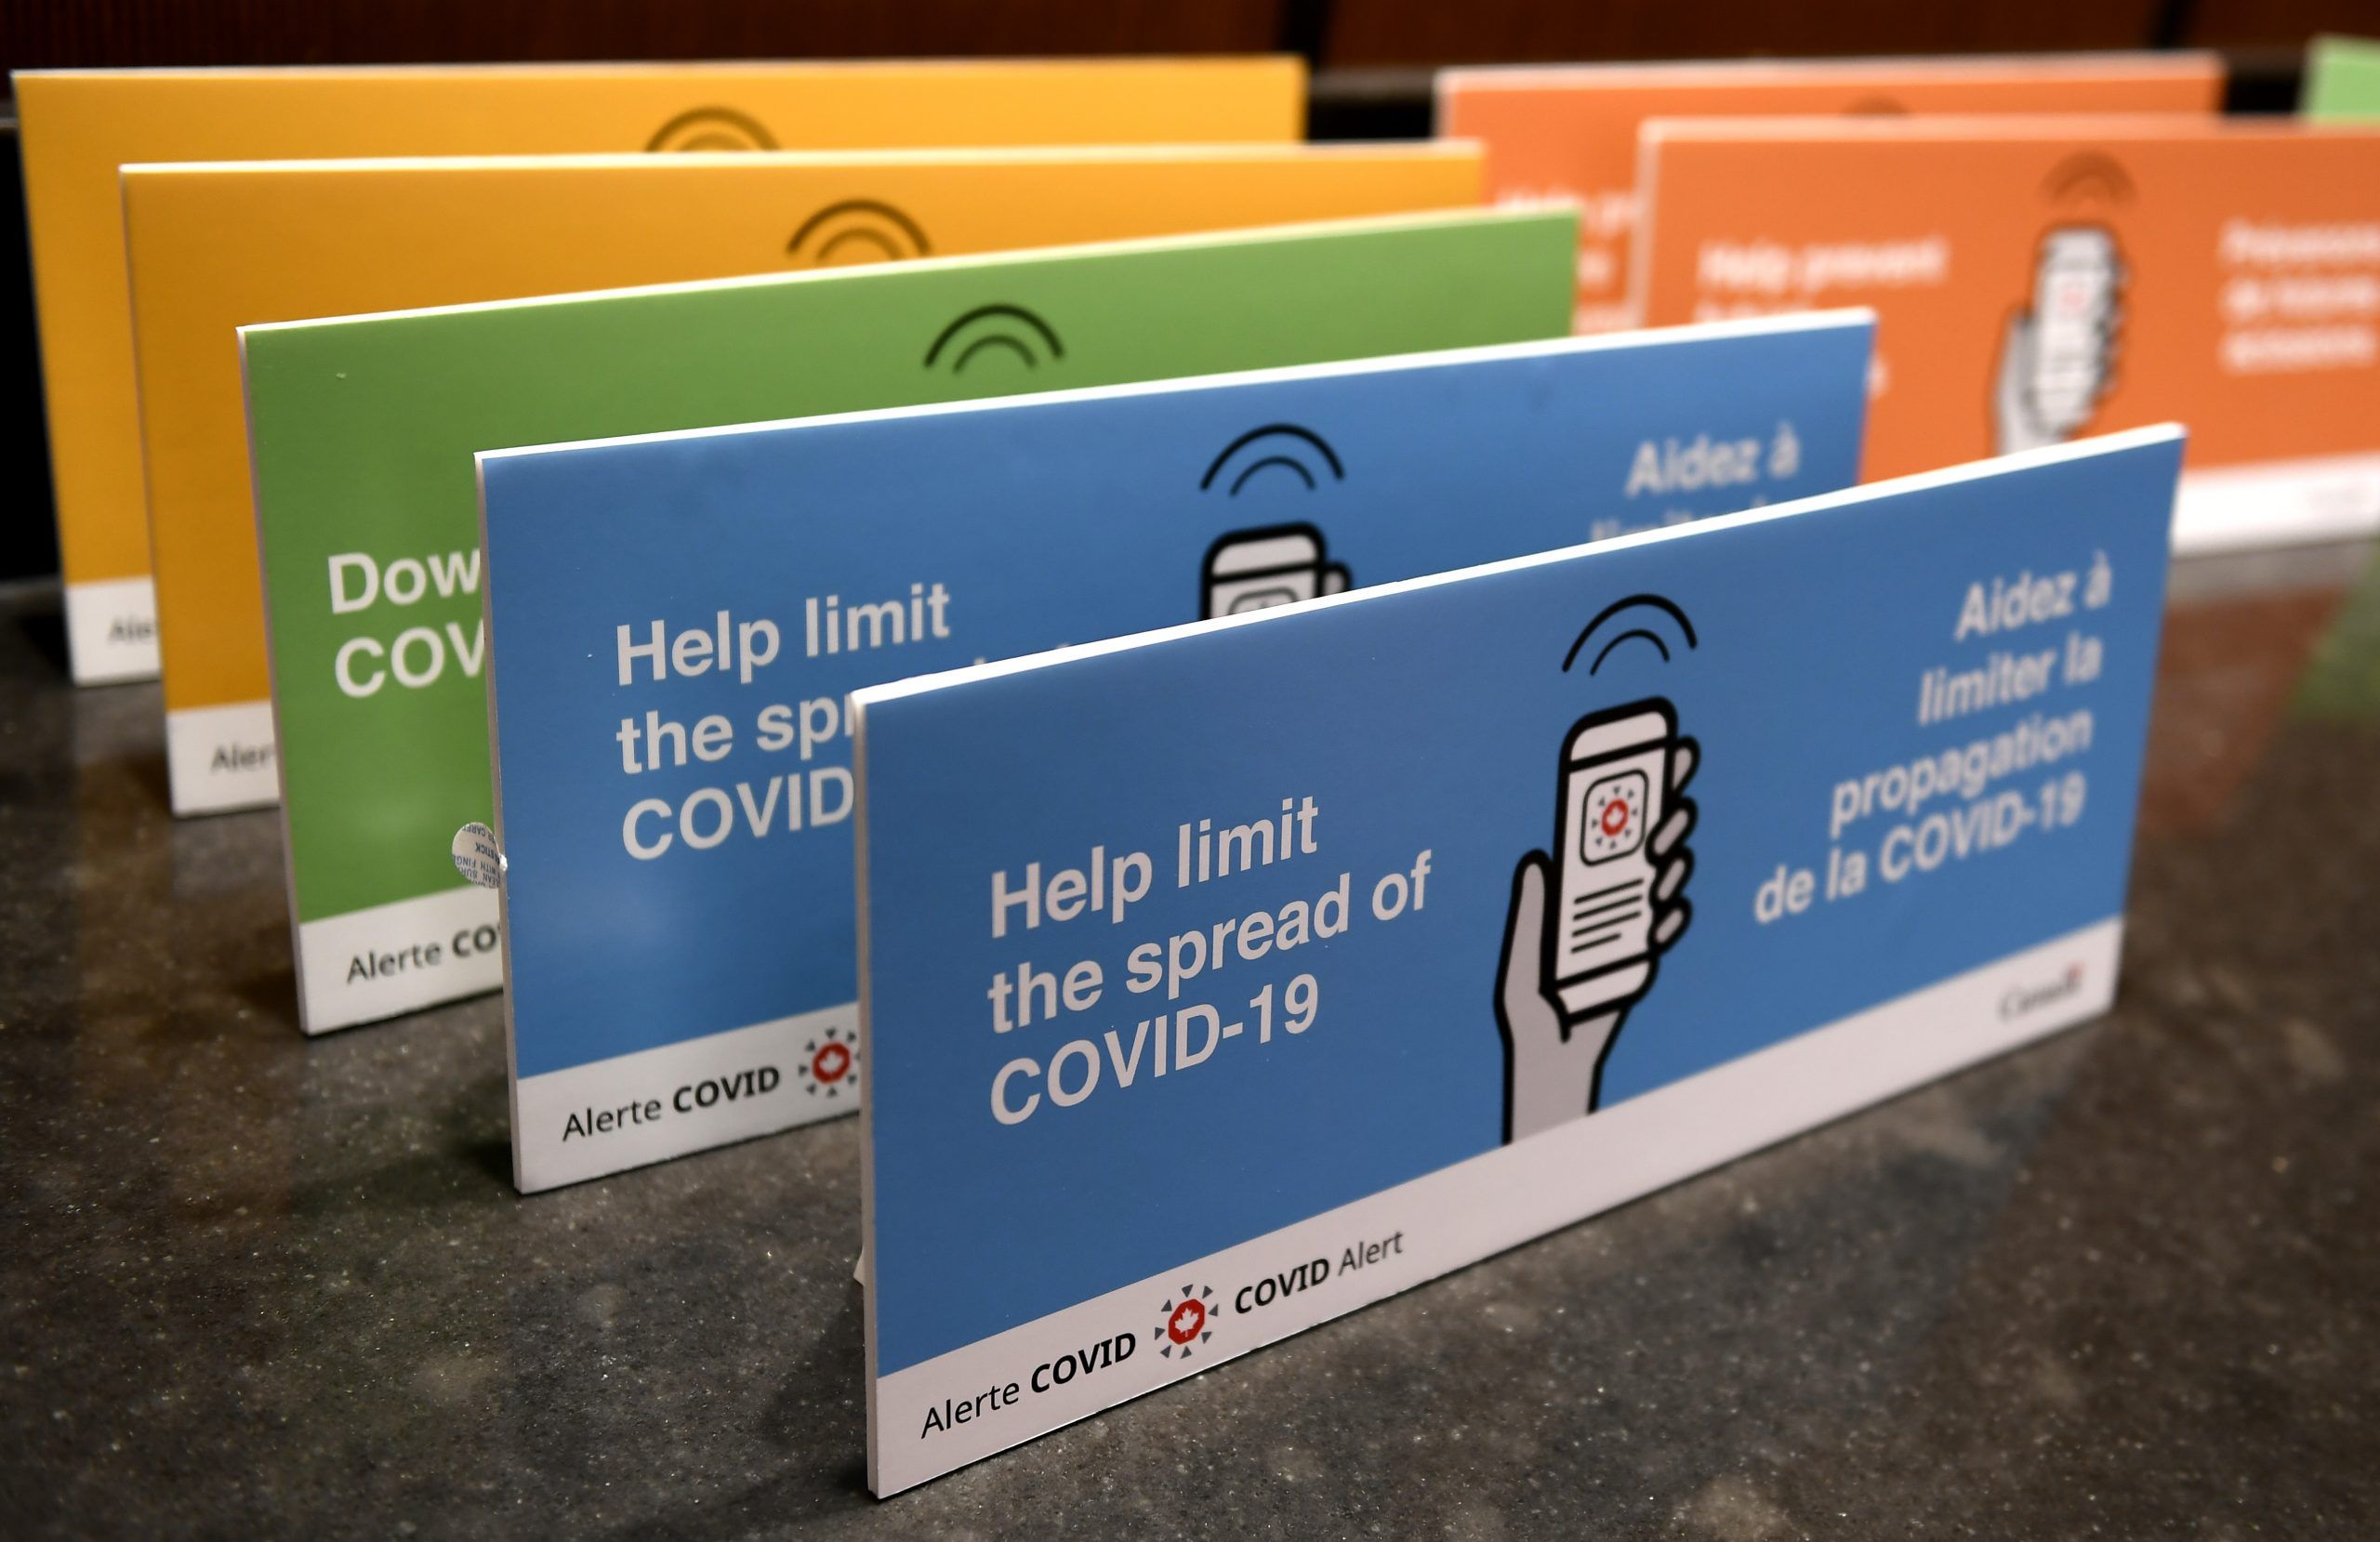 Podium placards promoting the COVID Alert app are seen on a table on Parliament Hill in Ottawa, on July 31, 2020.